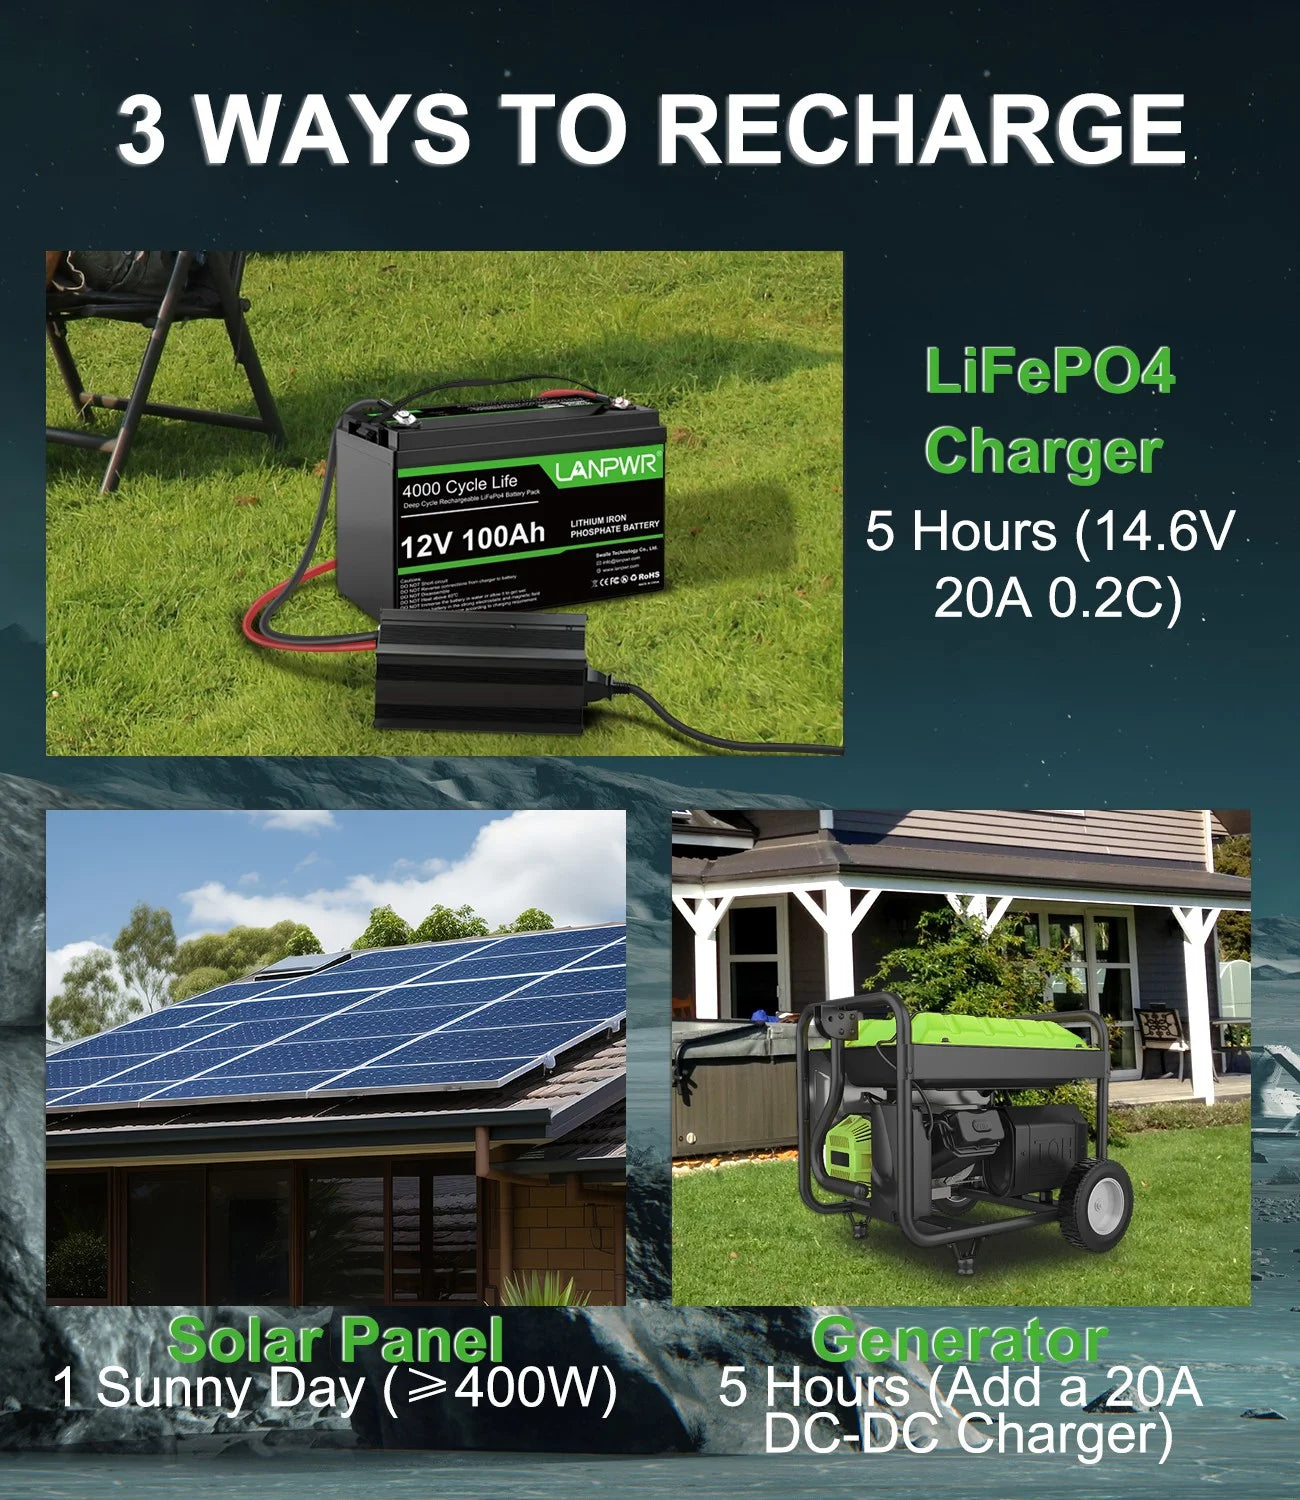 Tips for Using Portable Power Station During a Power Outage